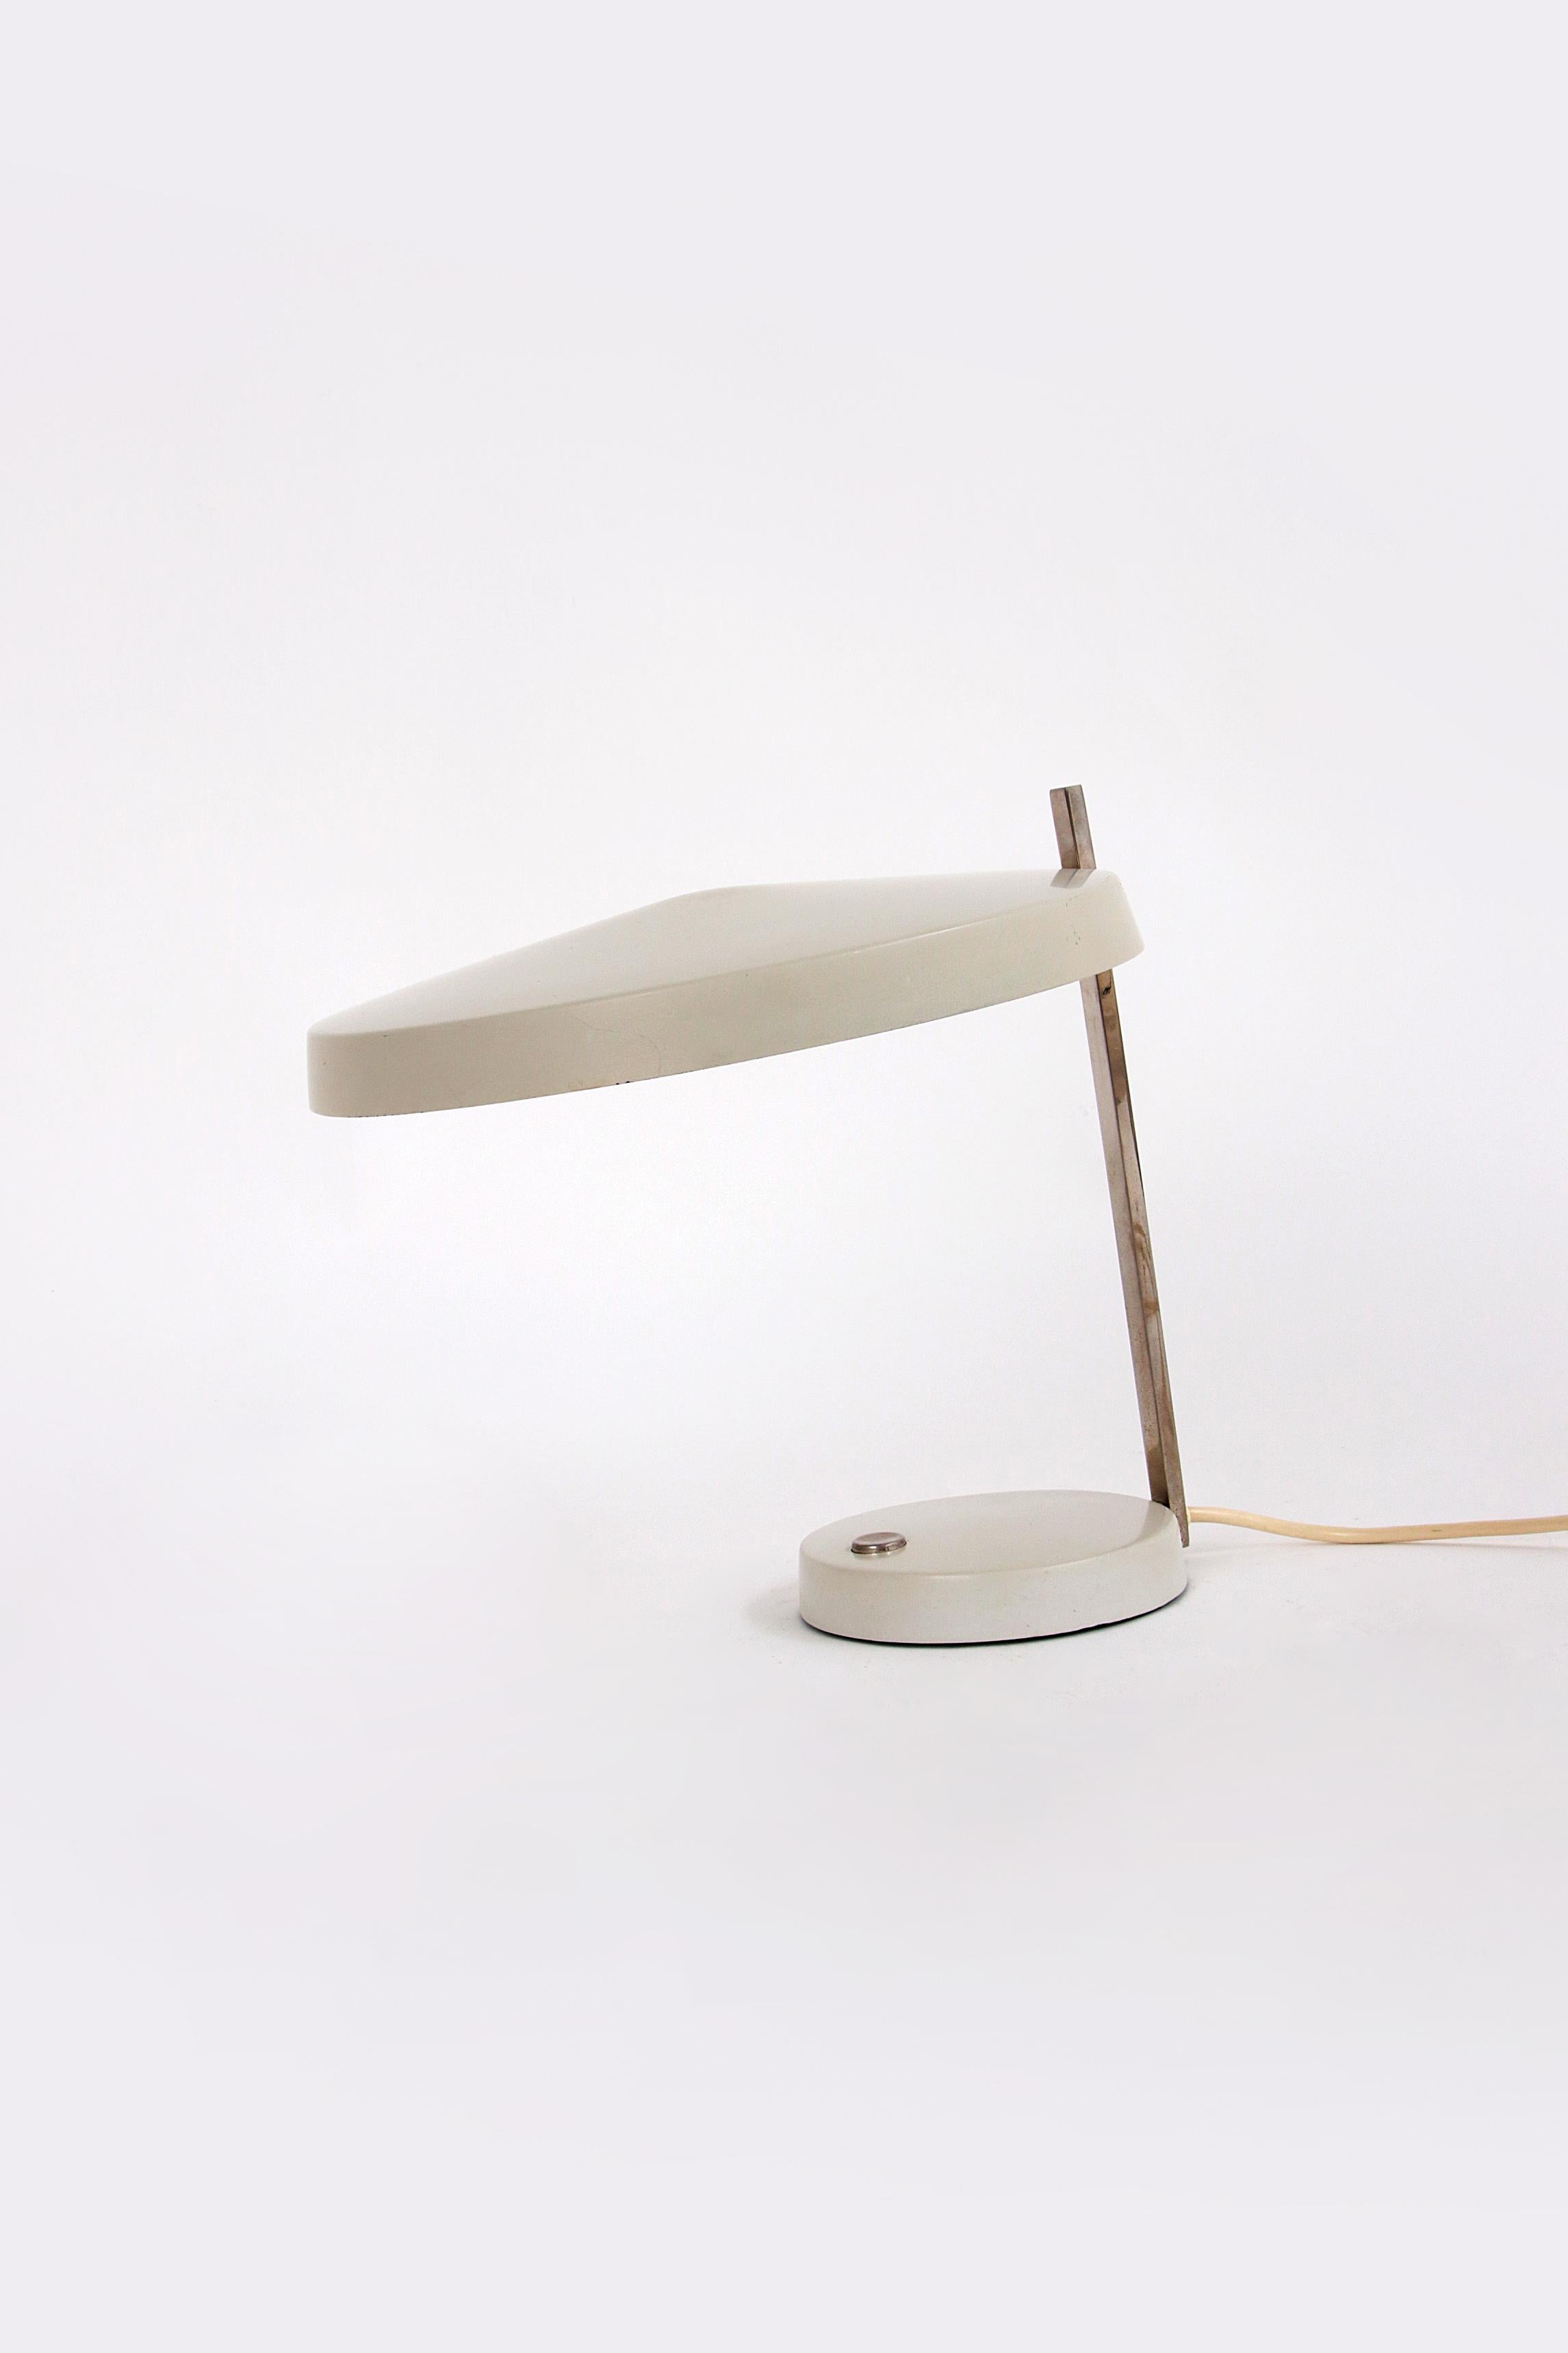 Hillebrand leuchten, desk lamp Oslo designed by Heinz Pfaender 1960.


Discover the charm of the 60s with this authentic Hillebrand Oslo desk lamp, a timeless piece designed by the renowned Heinz Pfaender. This lamp, a pearl for lovers of vintage